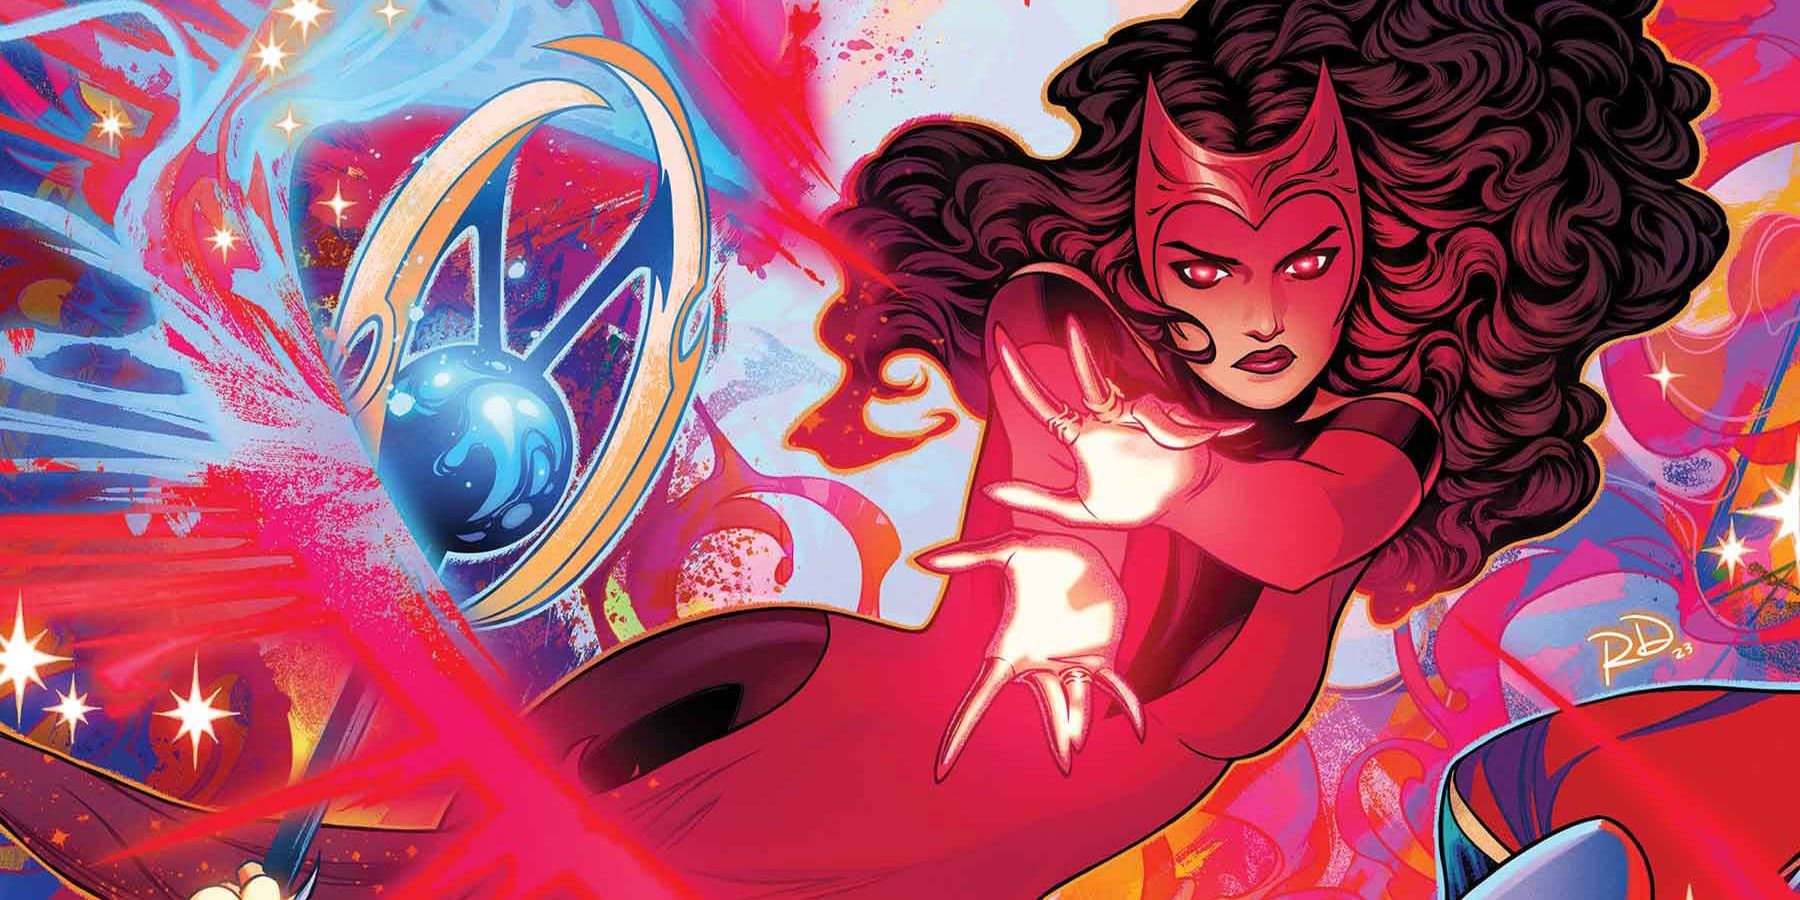 The cover of Scarlet Witch #10 in Marvel Comics.